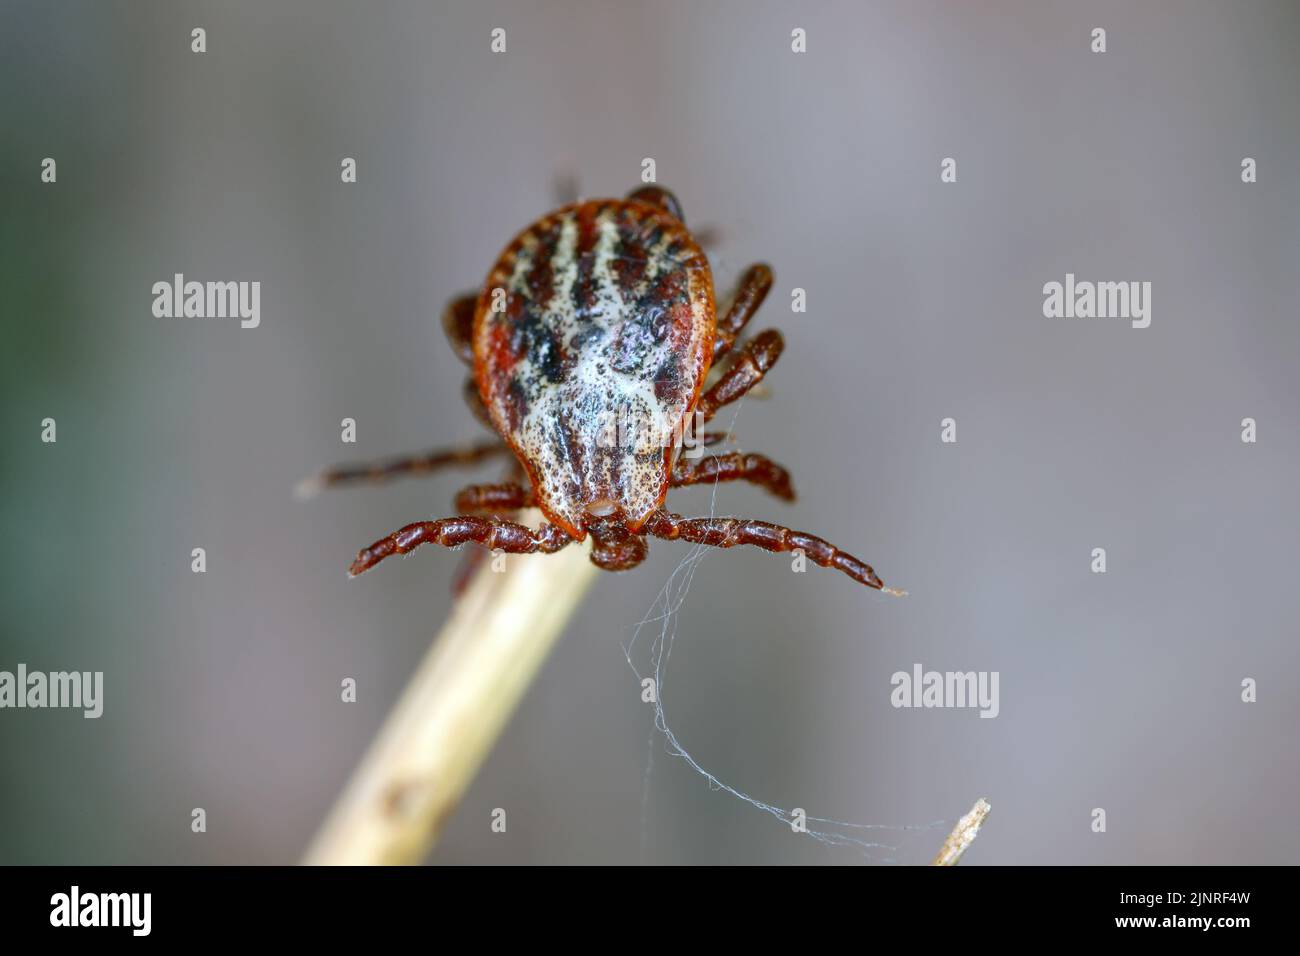 Tick on dry grass. High magnification. Stock Photo